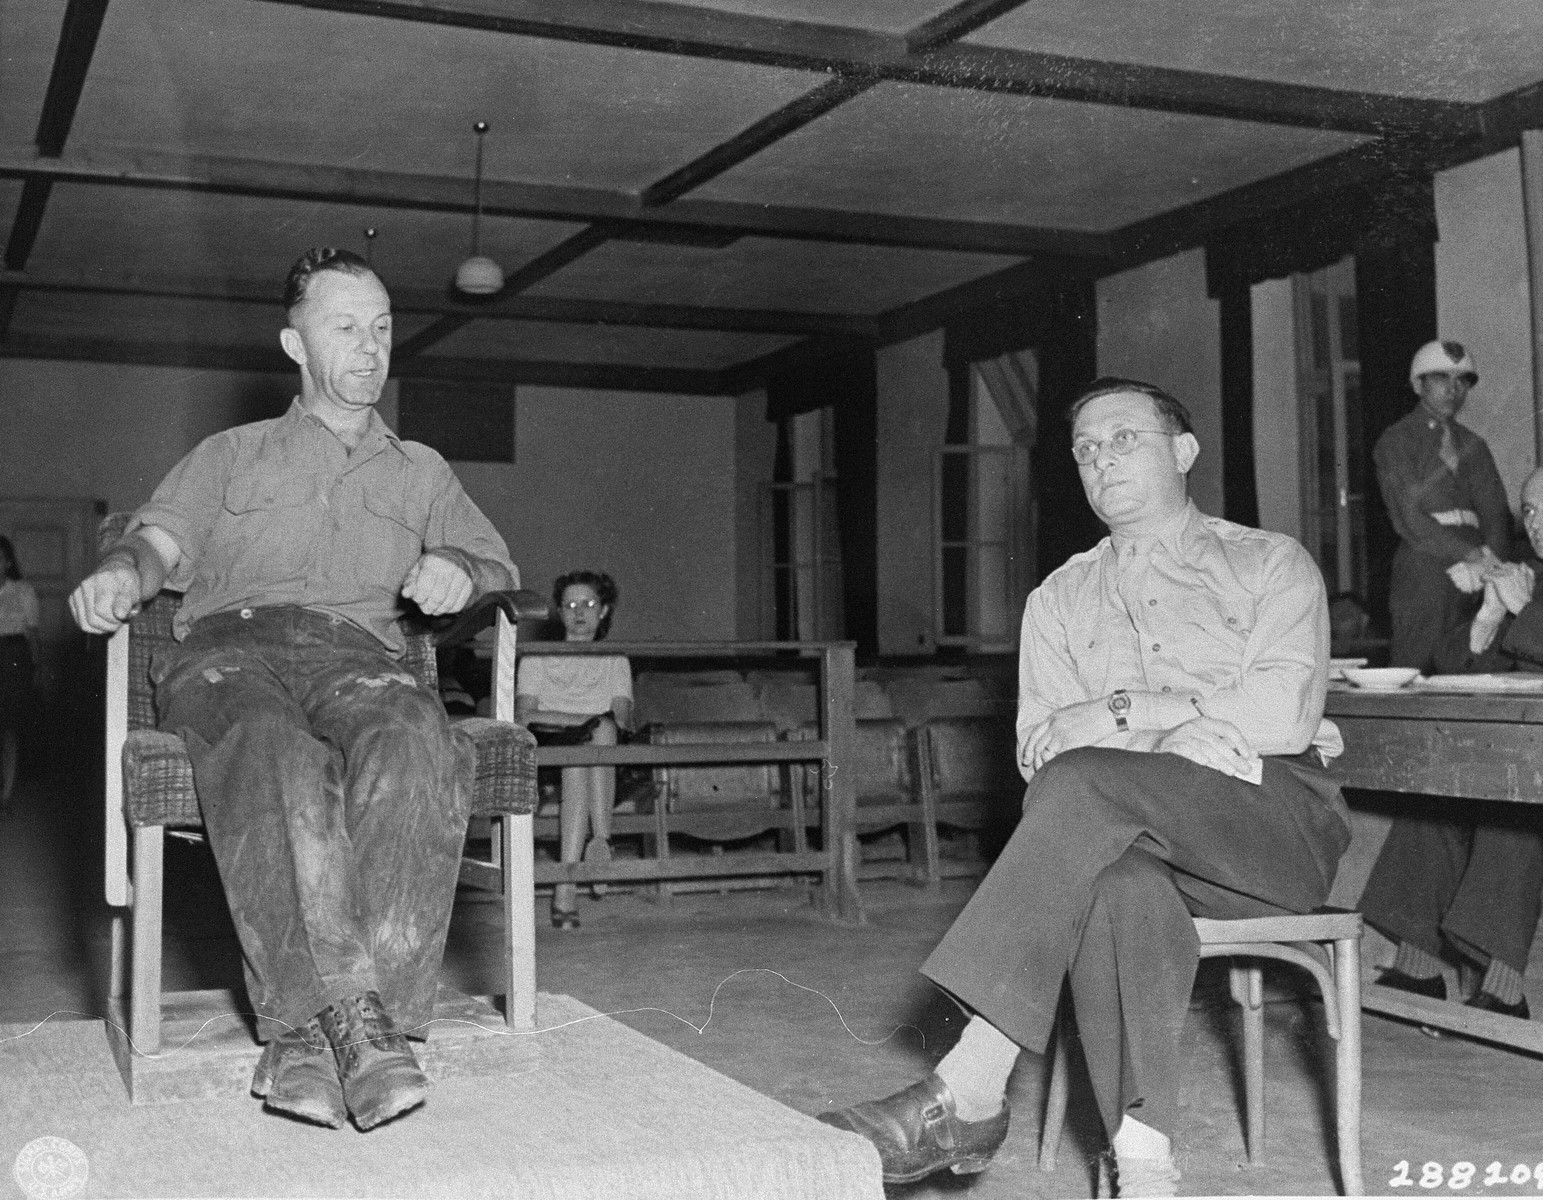 Hermann Grossmann, a former SS lieutenant, testifies in his own defense at the trial of 31 former camp personnel and prisoners from Buchenwald.  On the right is the interpreter, Rudolph Nathanson.